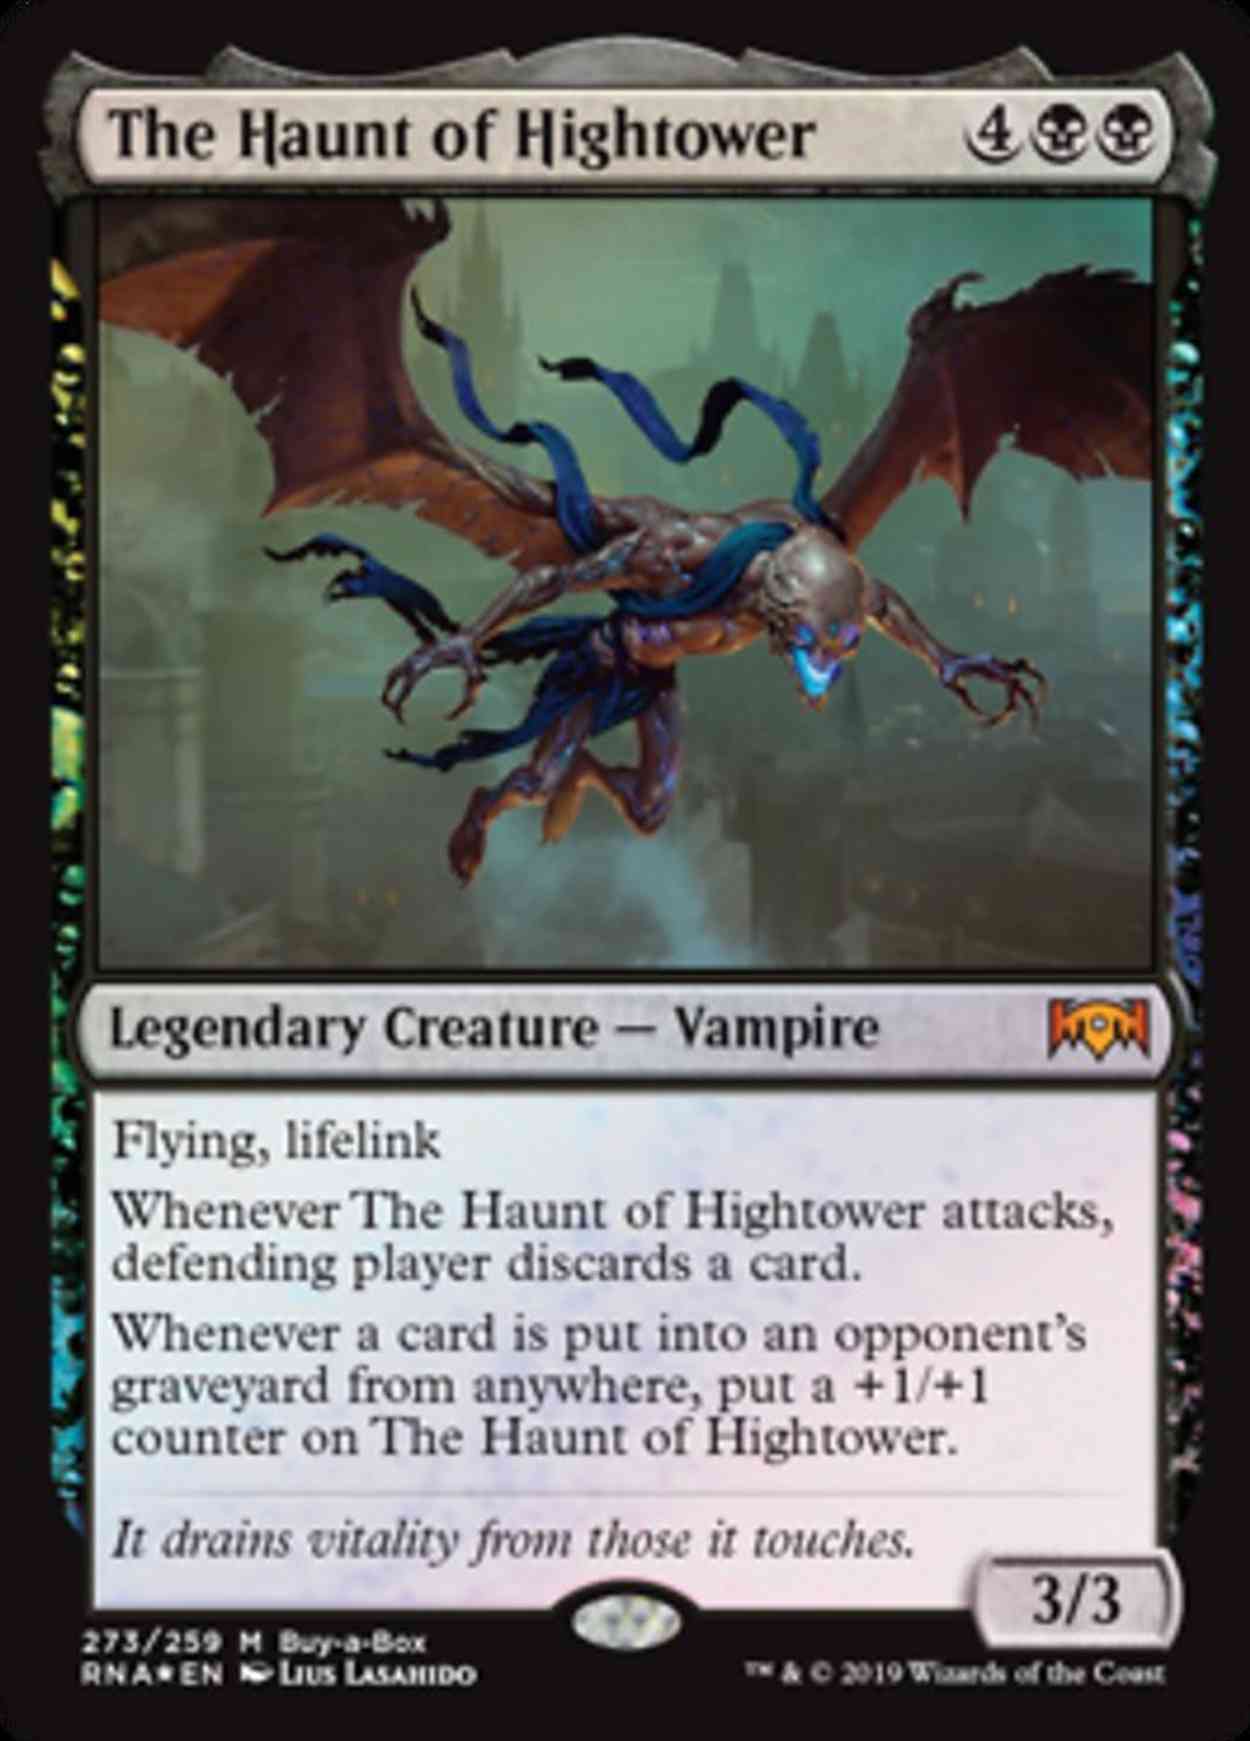 The Haunt of Hightower magic card front